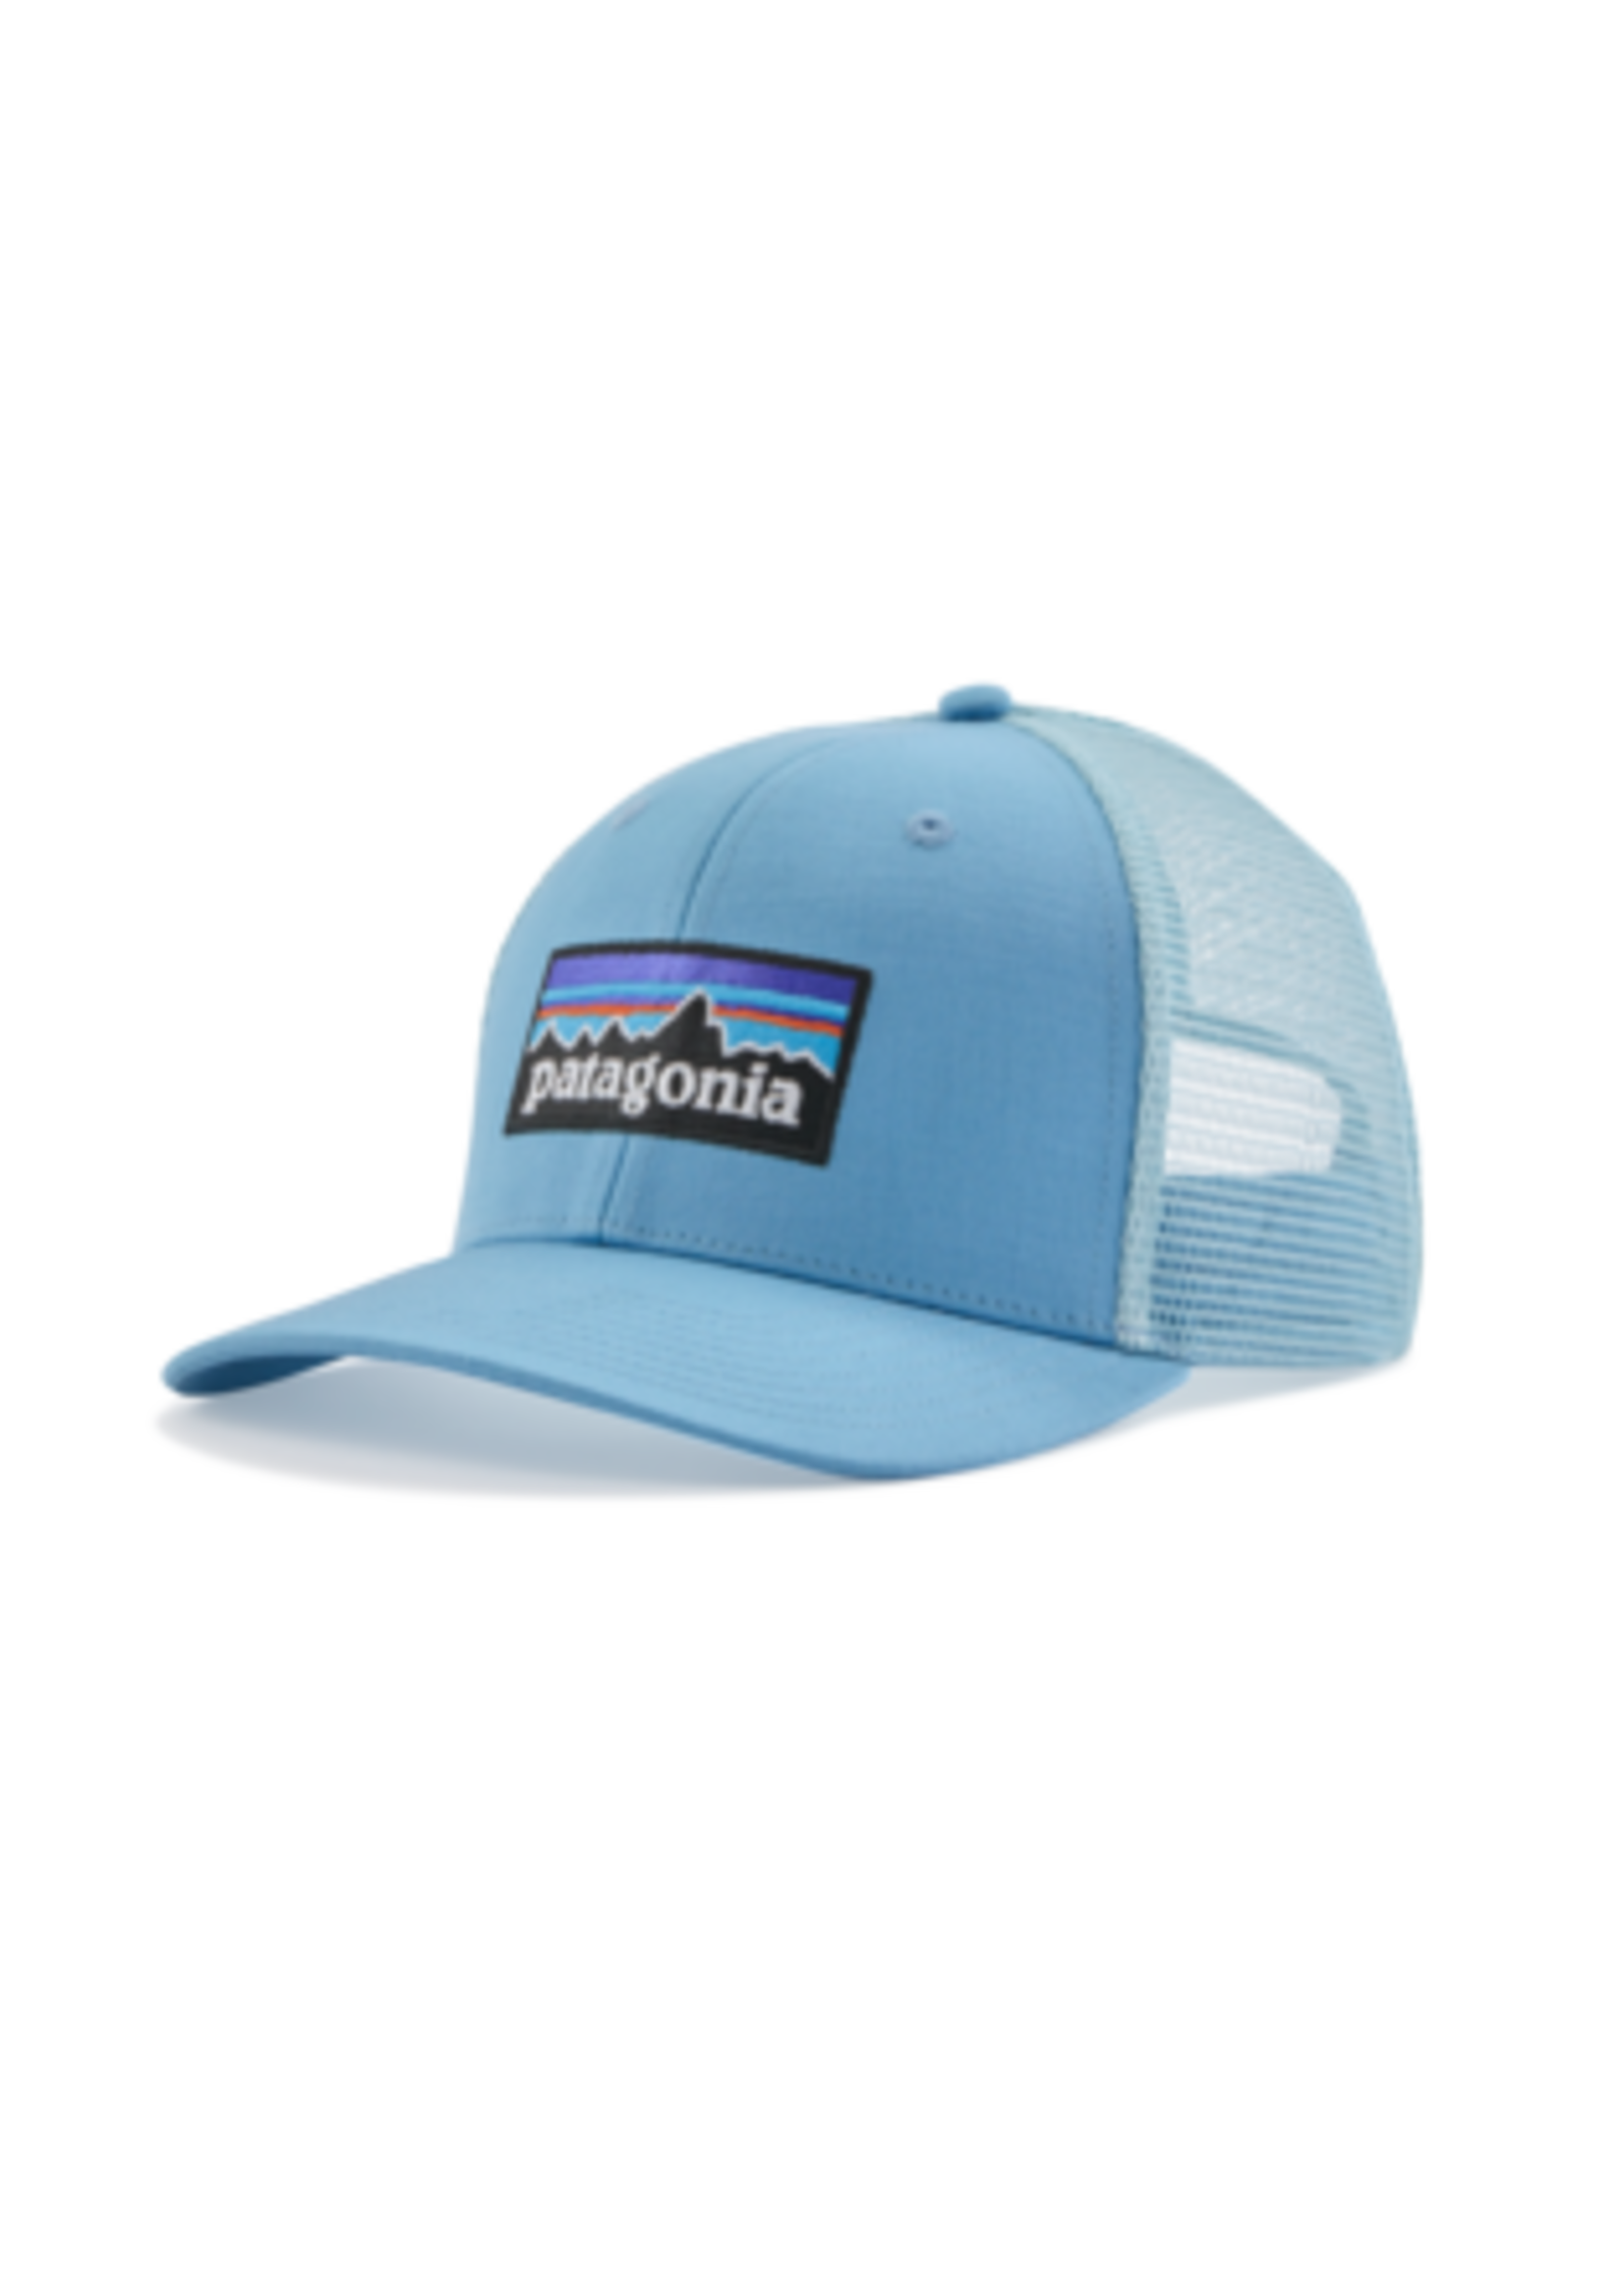 Patagonia Men's Trucker Hats for sale